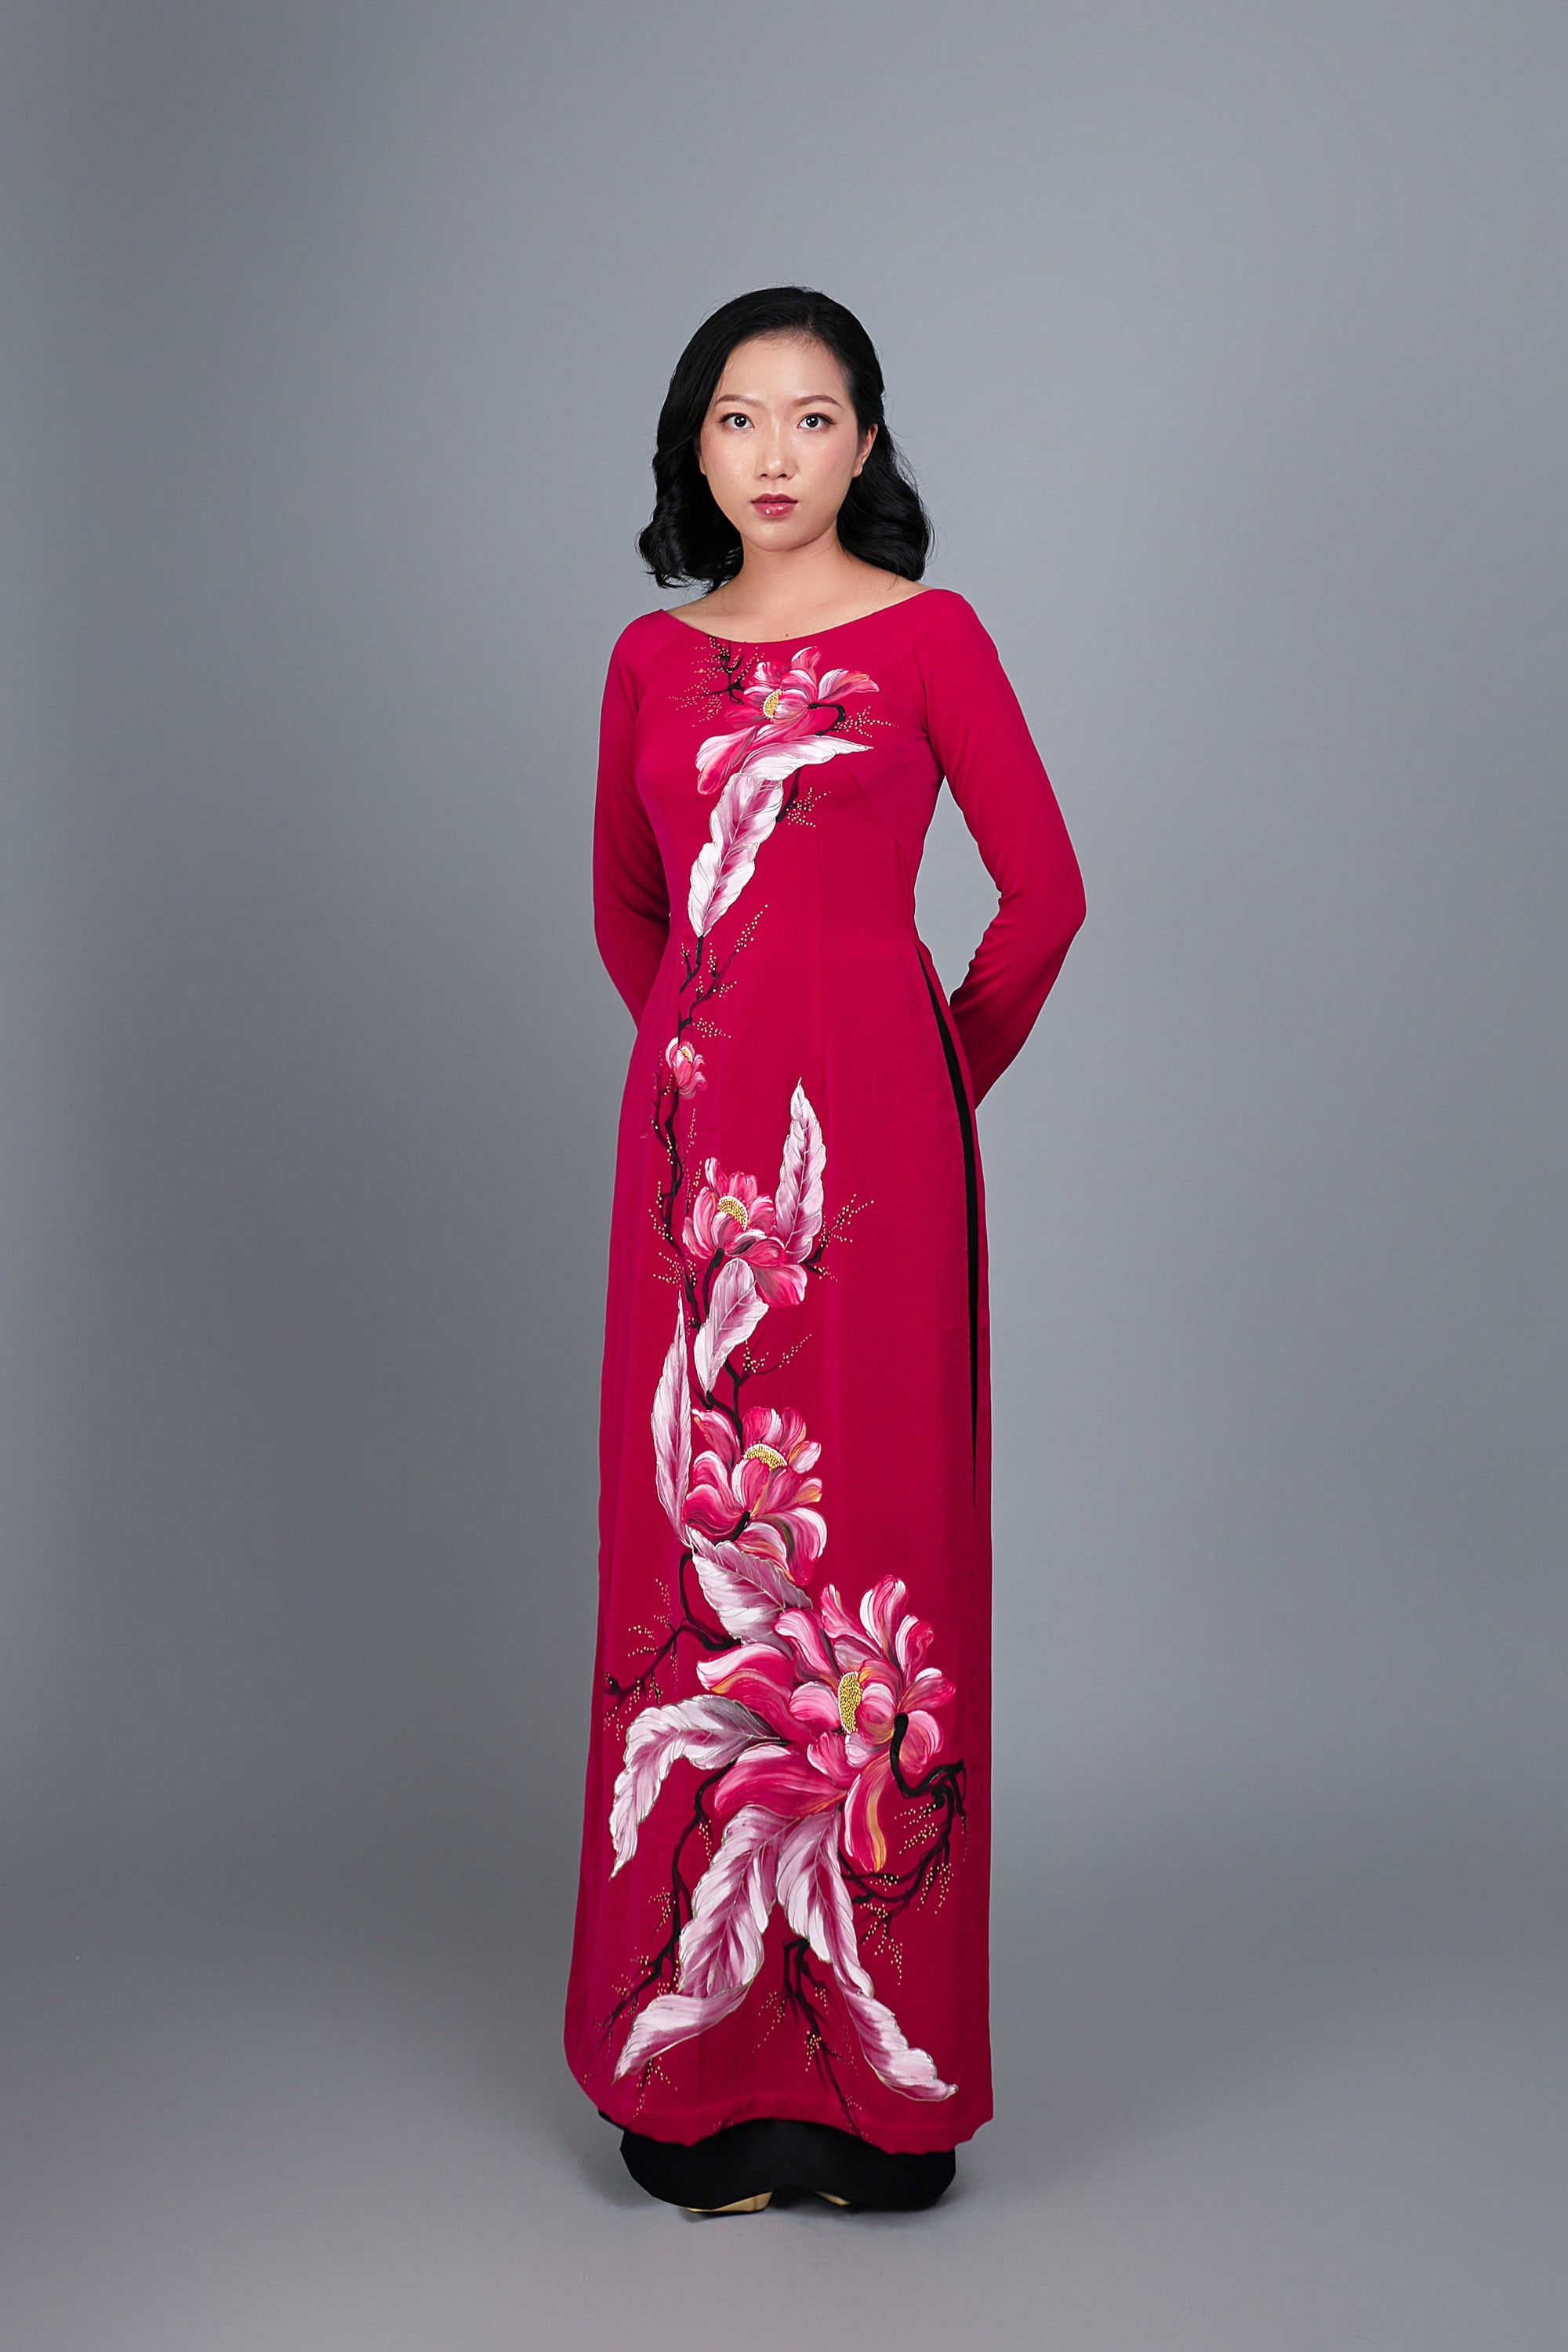 Custom made, hand-painted Ao Dai. Spectacular, floral motif on red silk.